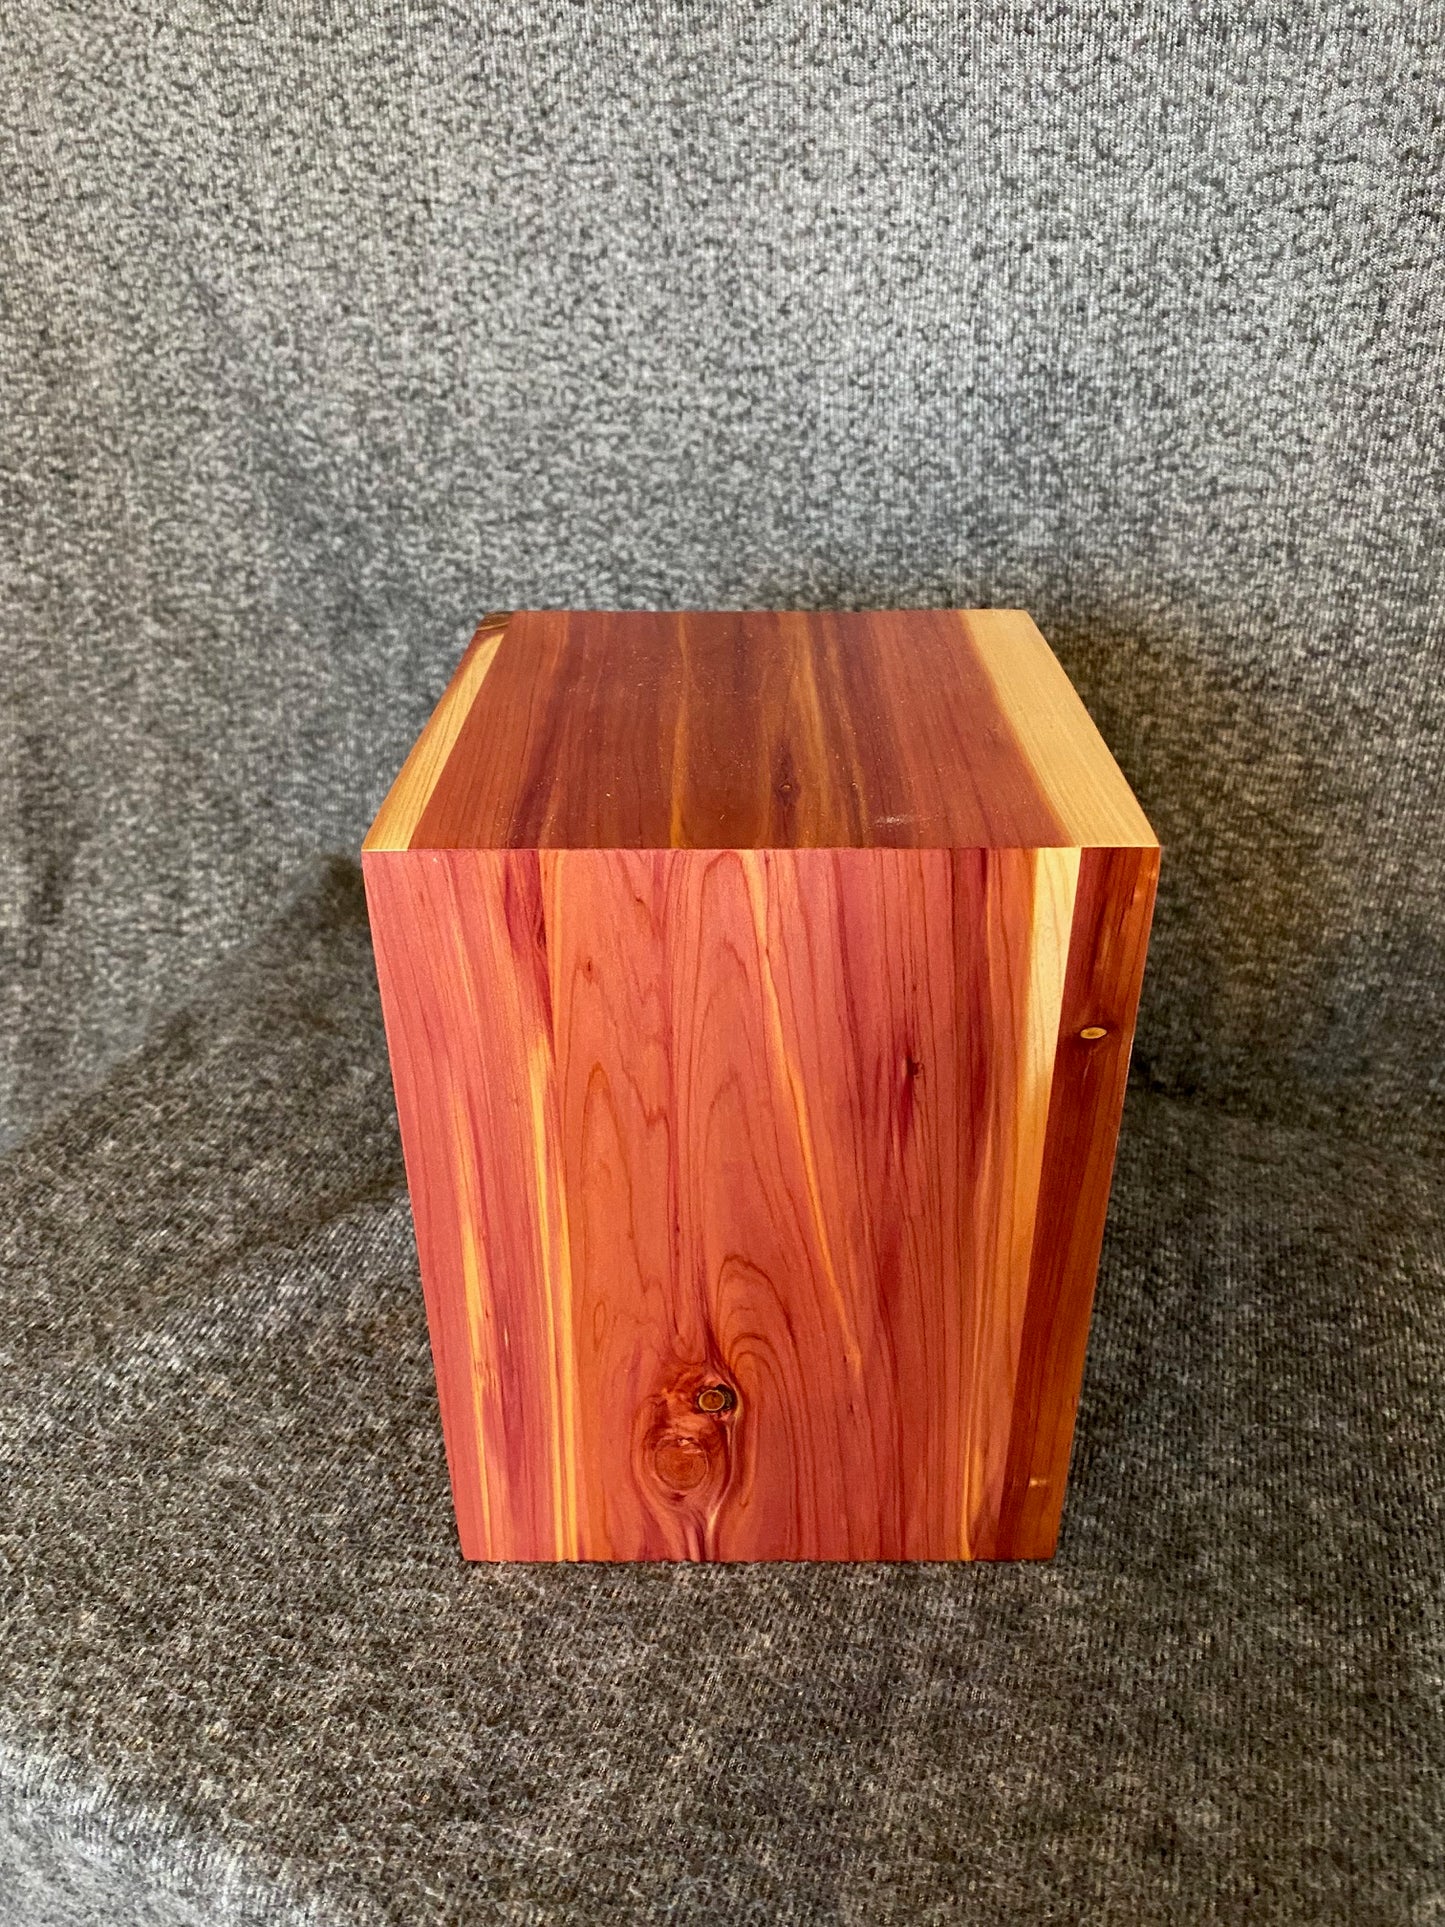 Aromatic Cedar Cremation Urn for Adult Human Ashes, up to 140 pounds